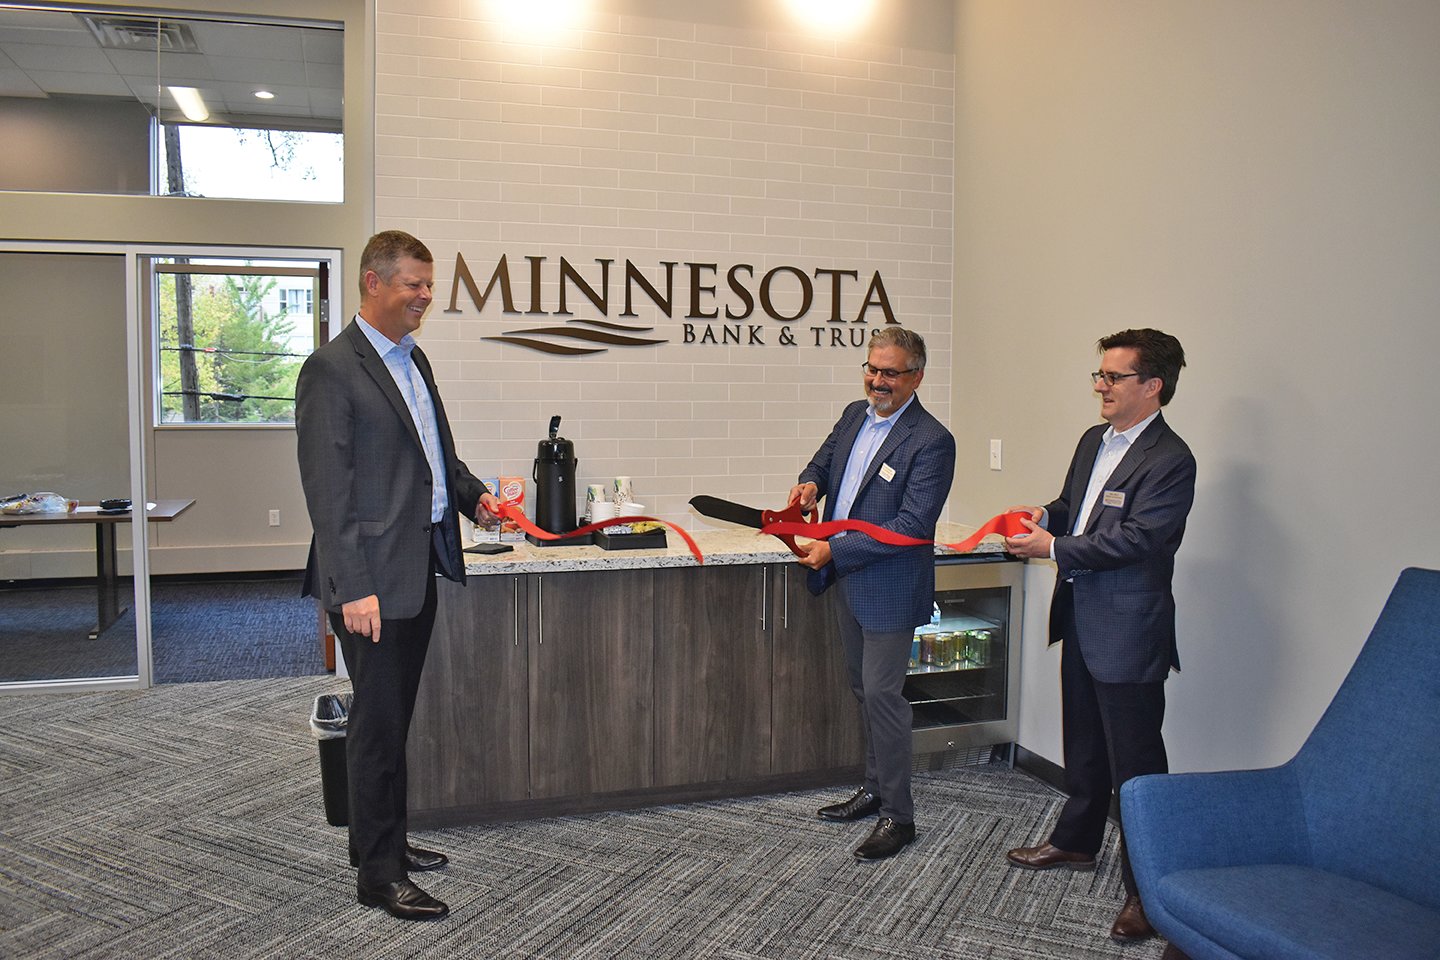 Many businesses reopened in 2021, including Bremer Bank and Lloyd’s Pharmacy, in new commercial space. Others were brand new to the community, including Minnesota Bank & Trust (shown above). Others expanded, including Tech Dump, who opened a retail store.